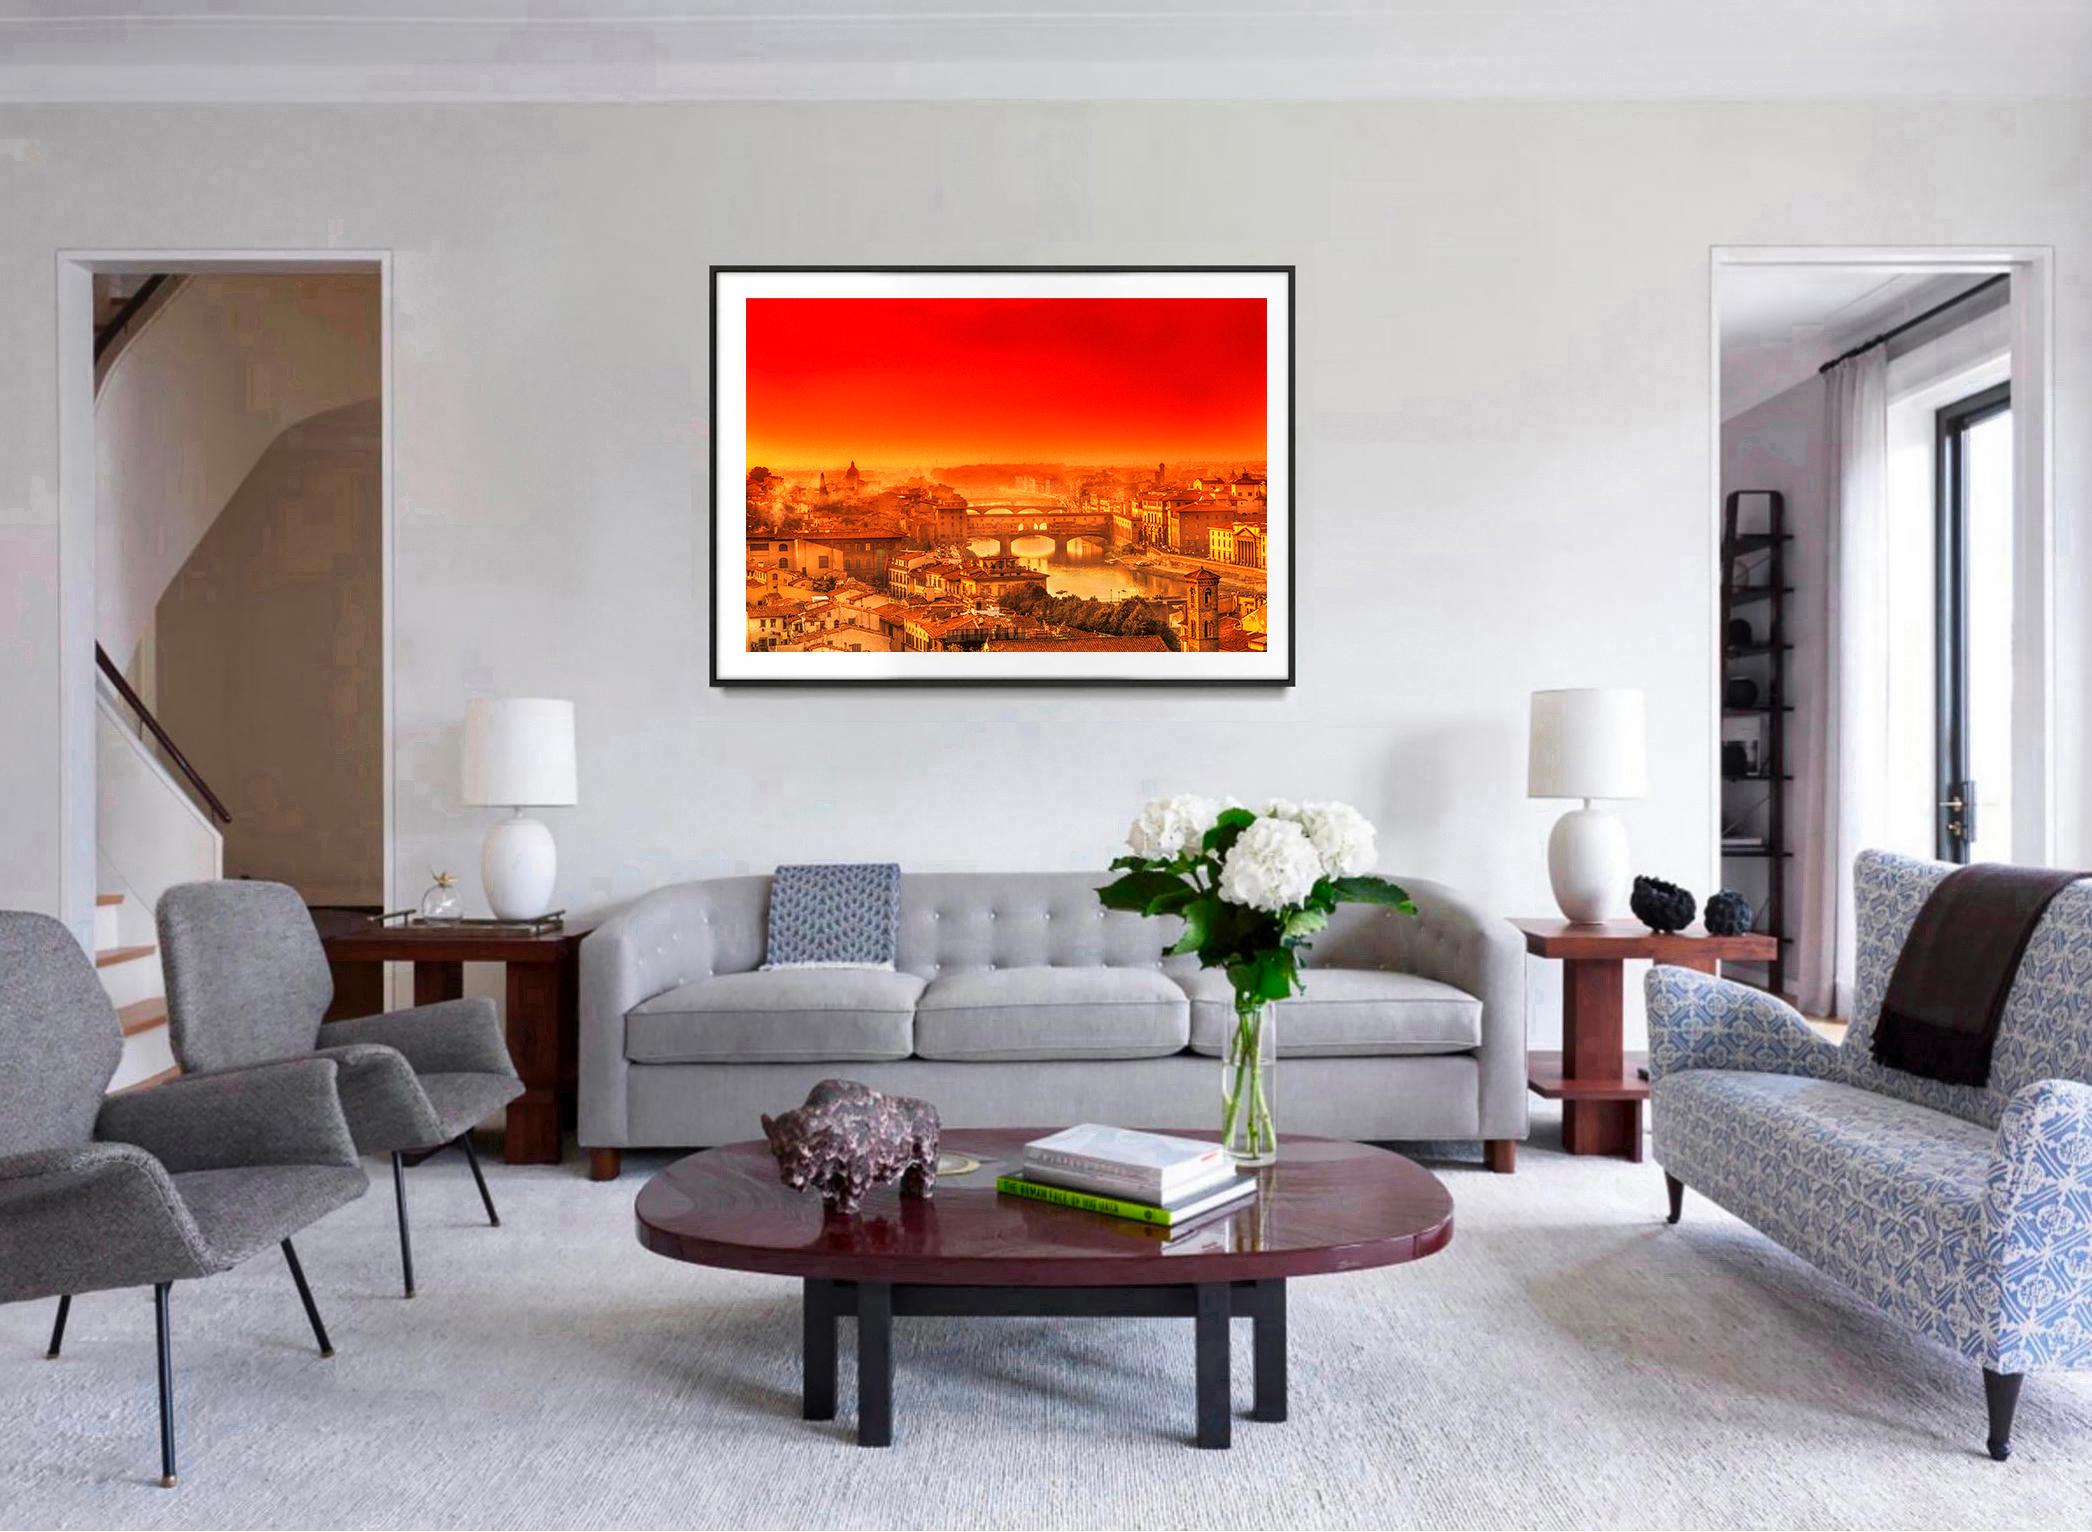 A fresh and bold paintbrush characterizes a classic view of Florence. Mitchell Funk's application of vibrantly bold orange effects a rebirth of the birthplace of the Renaissance. Wrapped in a veil of pure color, the 500-year-old terra cotta roofed